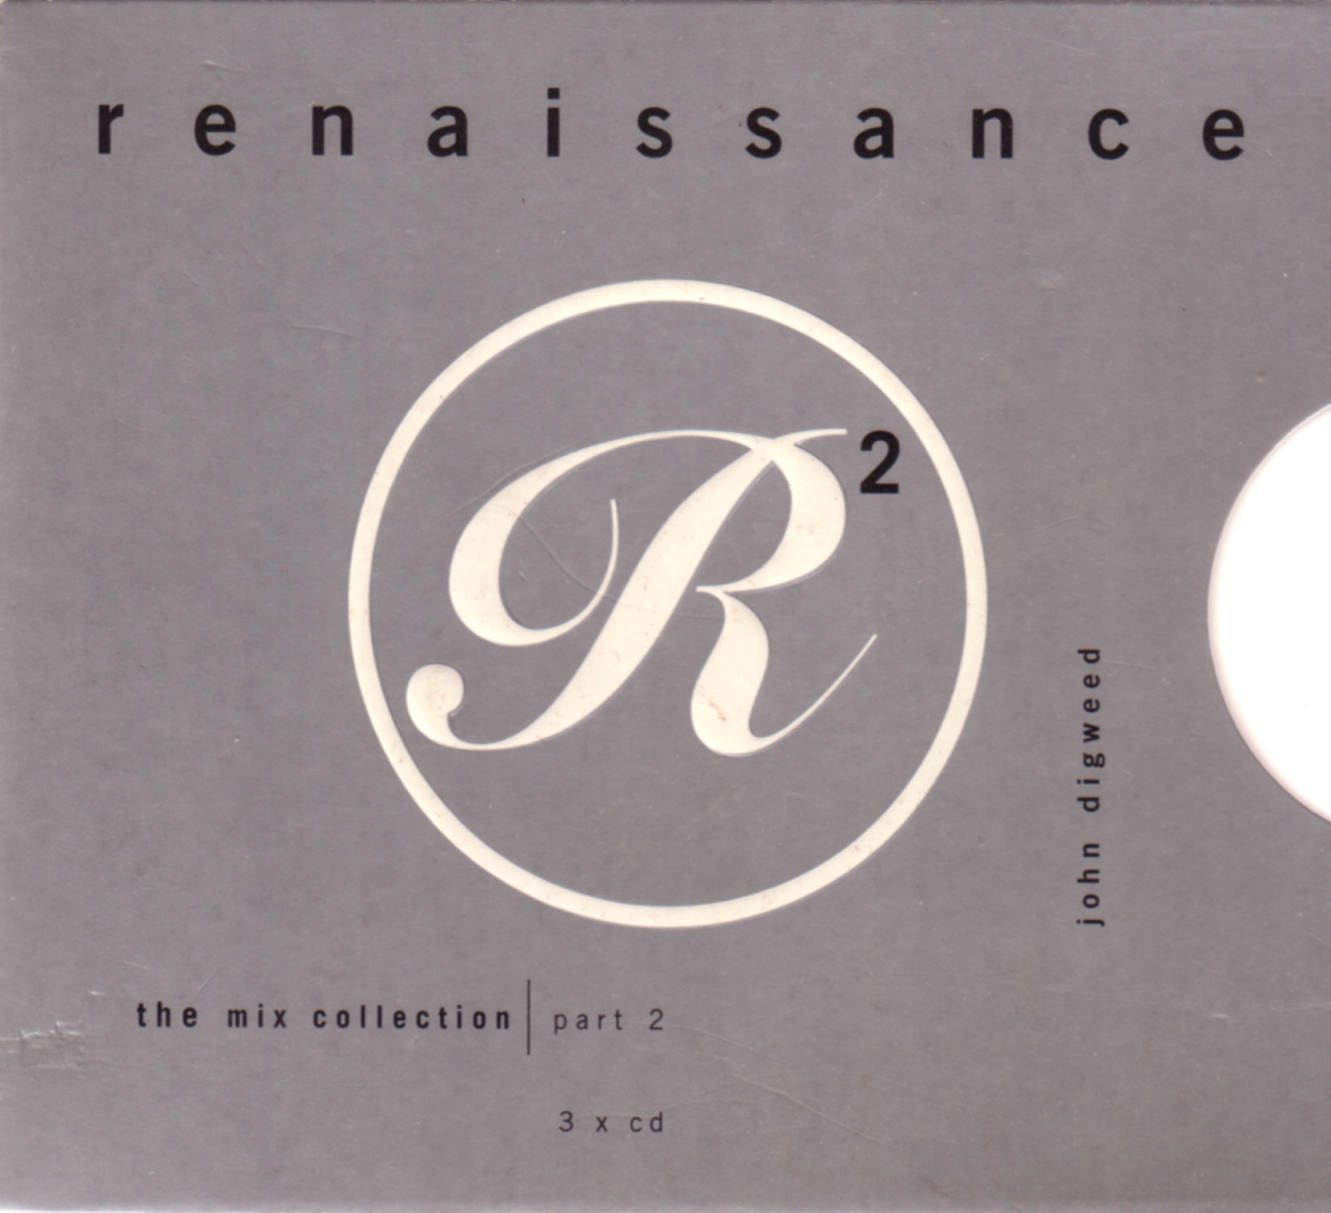 Renaissance - The Mix Collection Part 2 (1995) (Mixed by John Digweed)